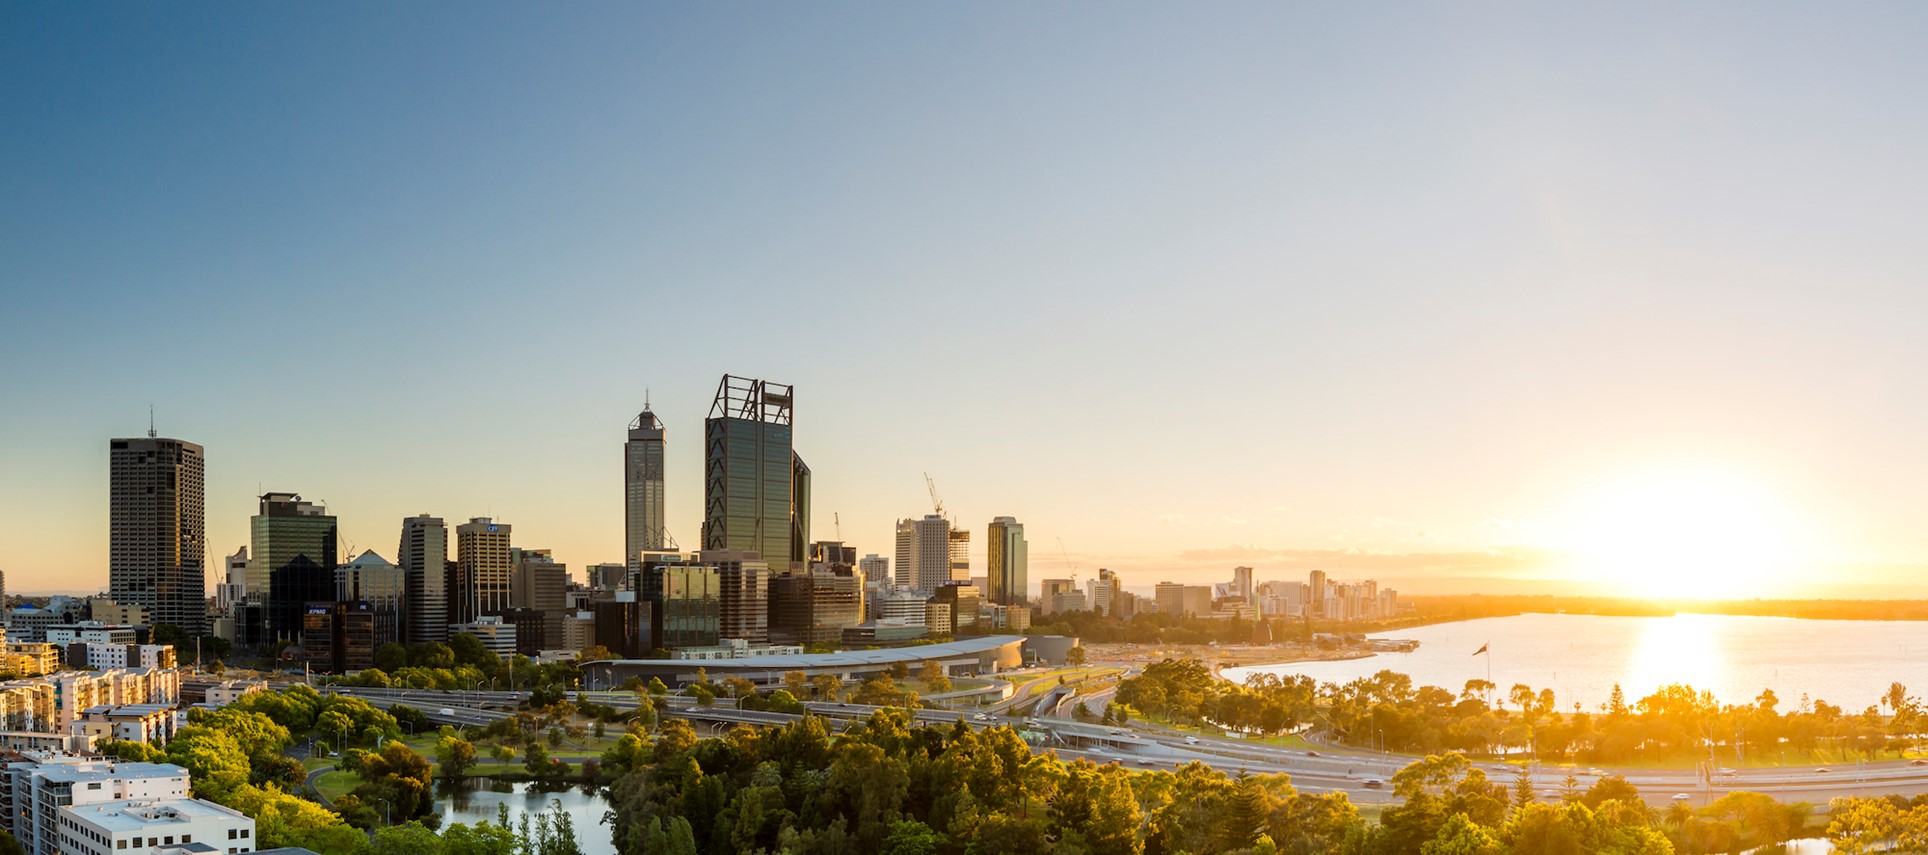 Perth offers affordable properties within close proximity to the CBD. Picture: Getty